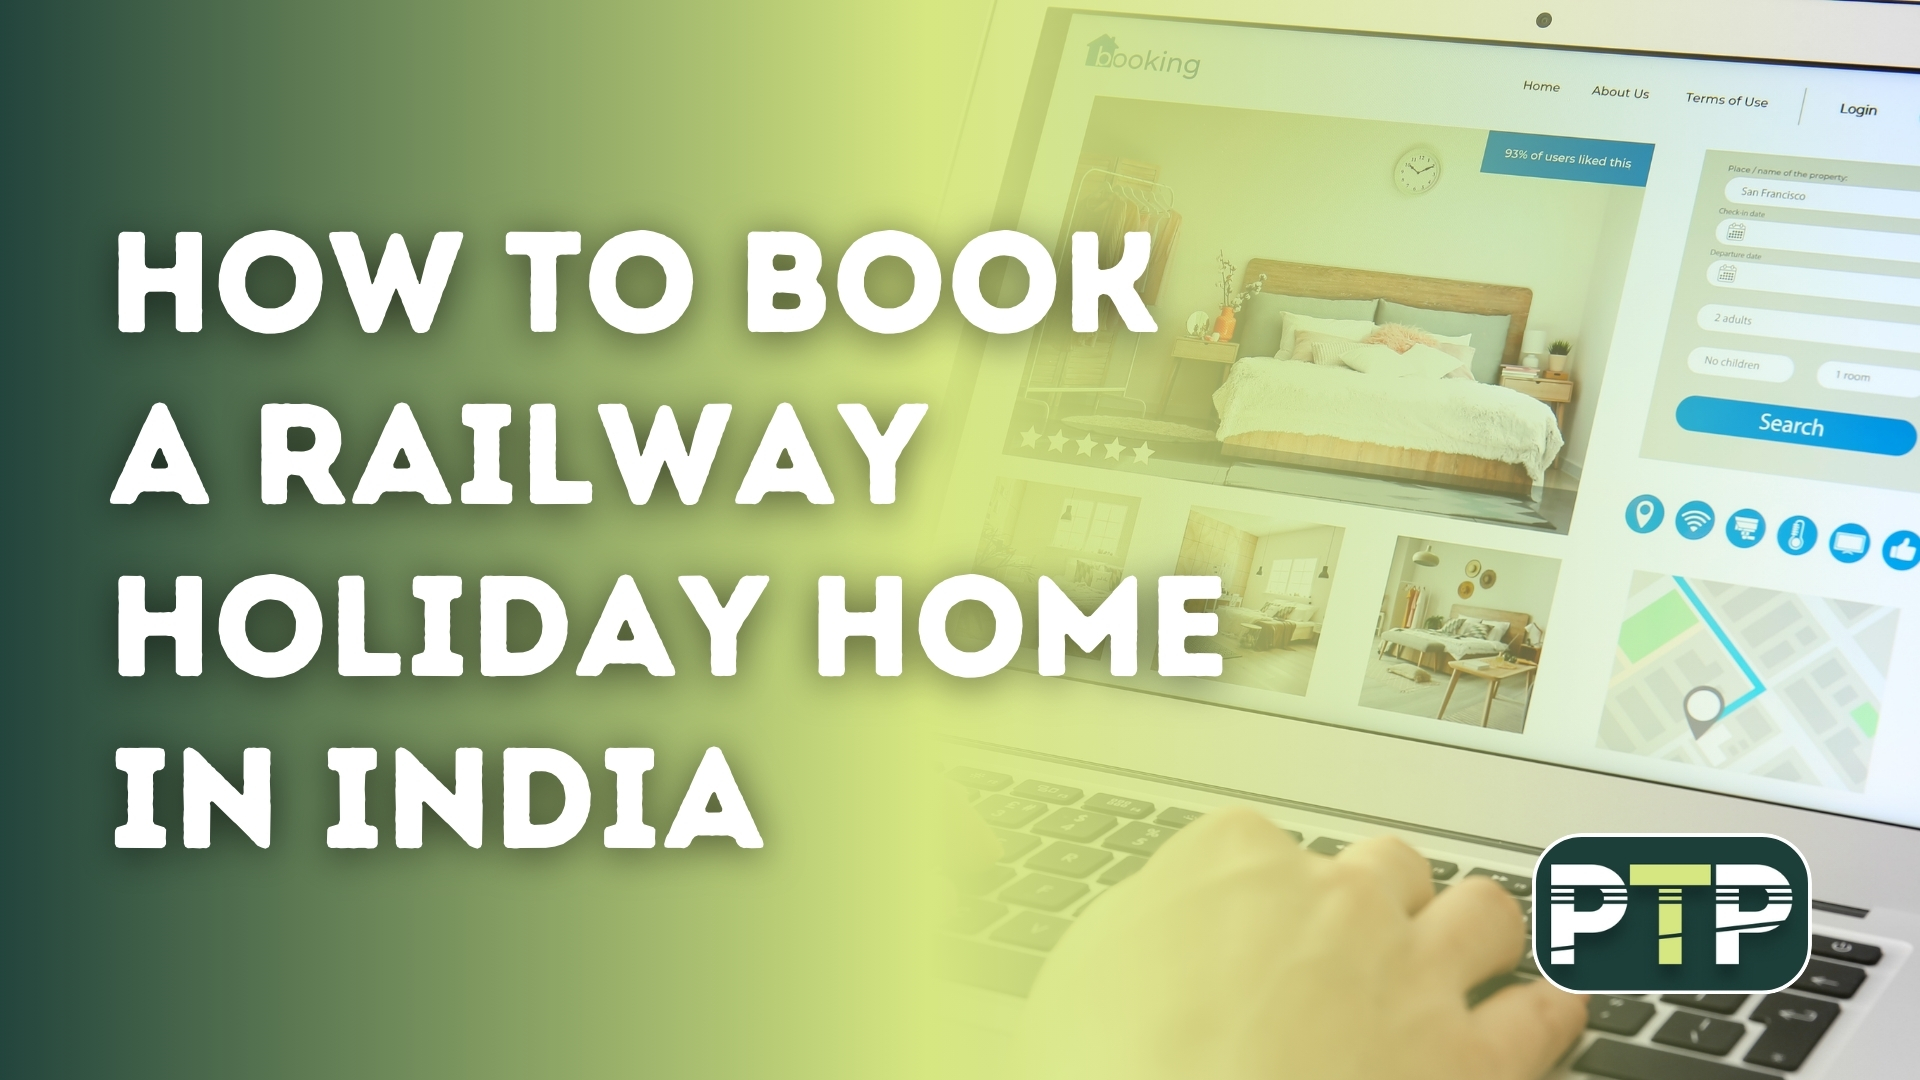 How to Book a Railway Holiday Home in India